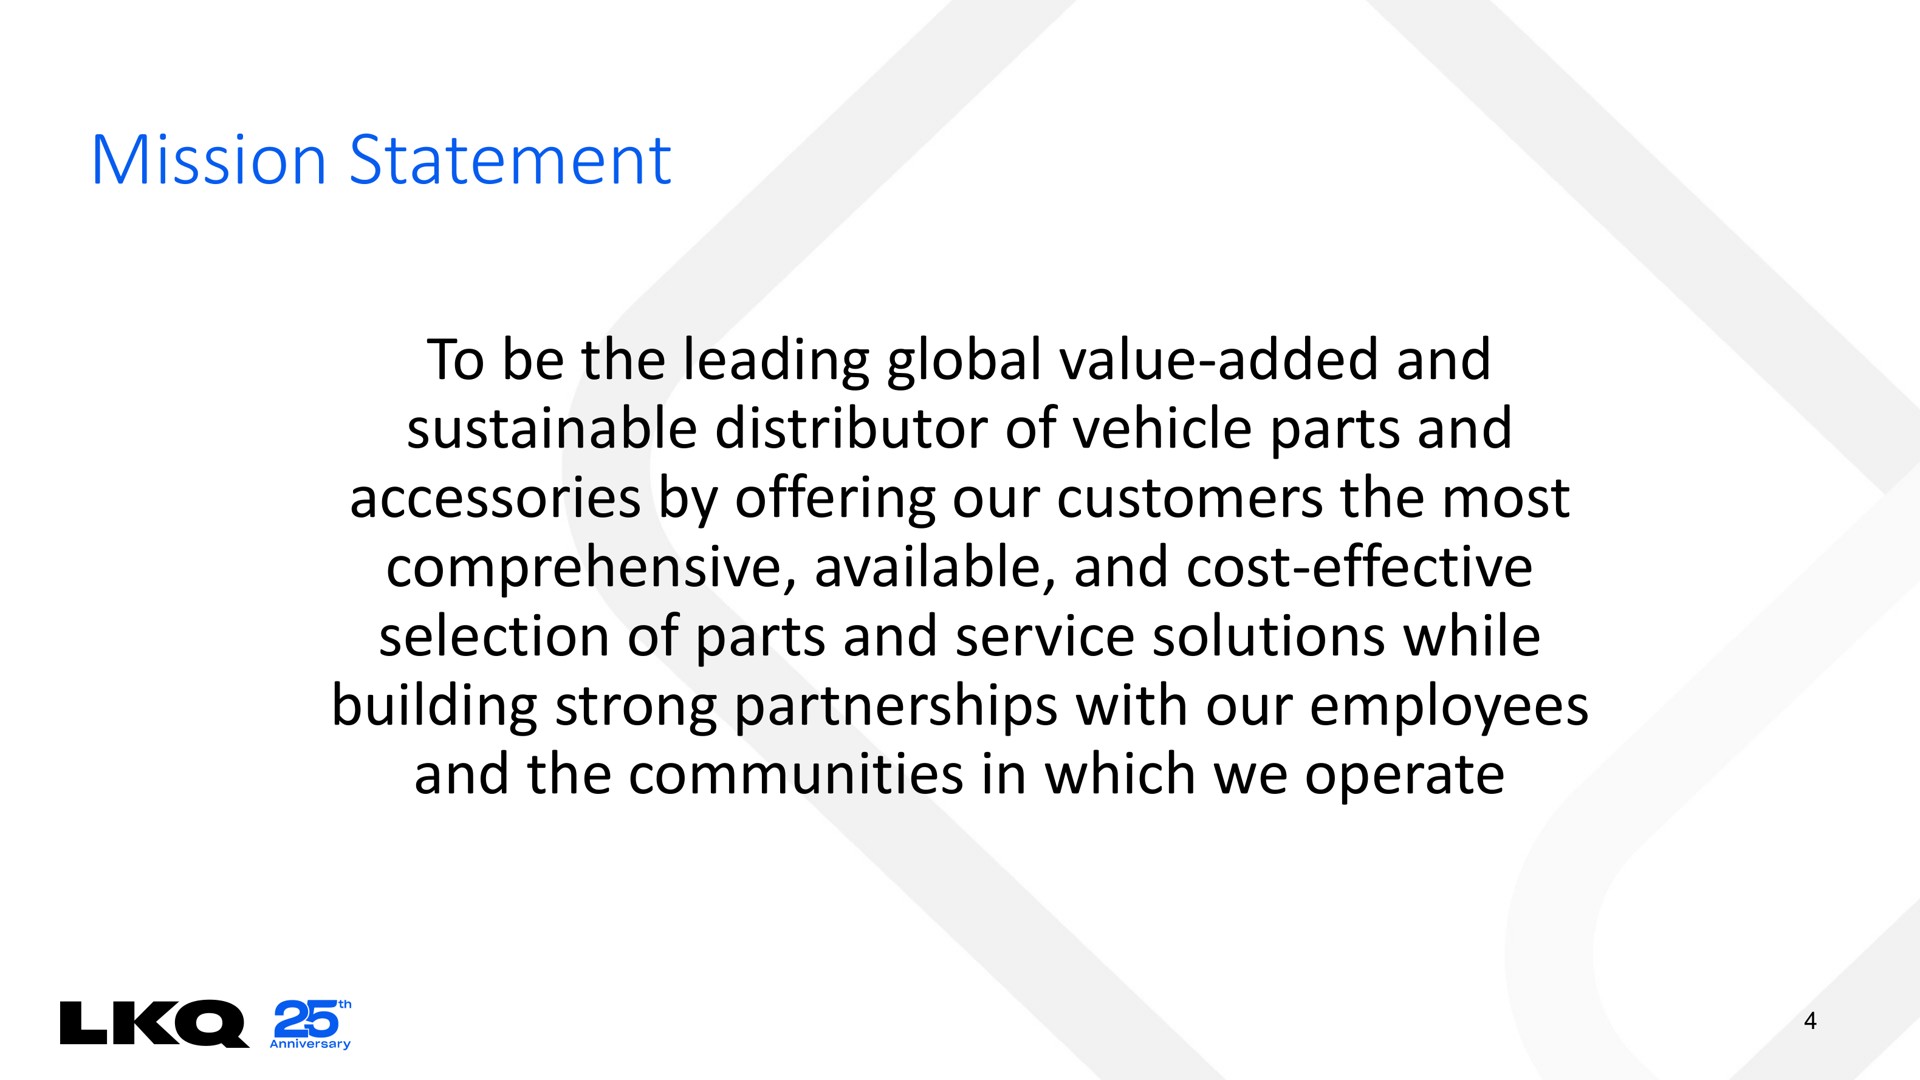 mission statement to be the leading global value added and sustainable distributor of vehicle parts and accessories by offering our customers the most comprehensive available and cost effective selection of parts and service solutions while building strong partnerships with our employees and the communities in which we operate | LKQ